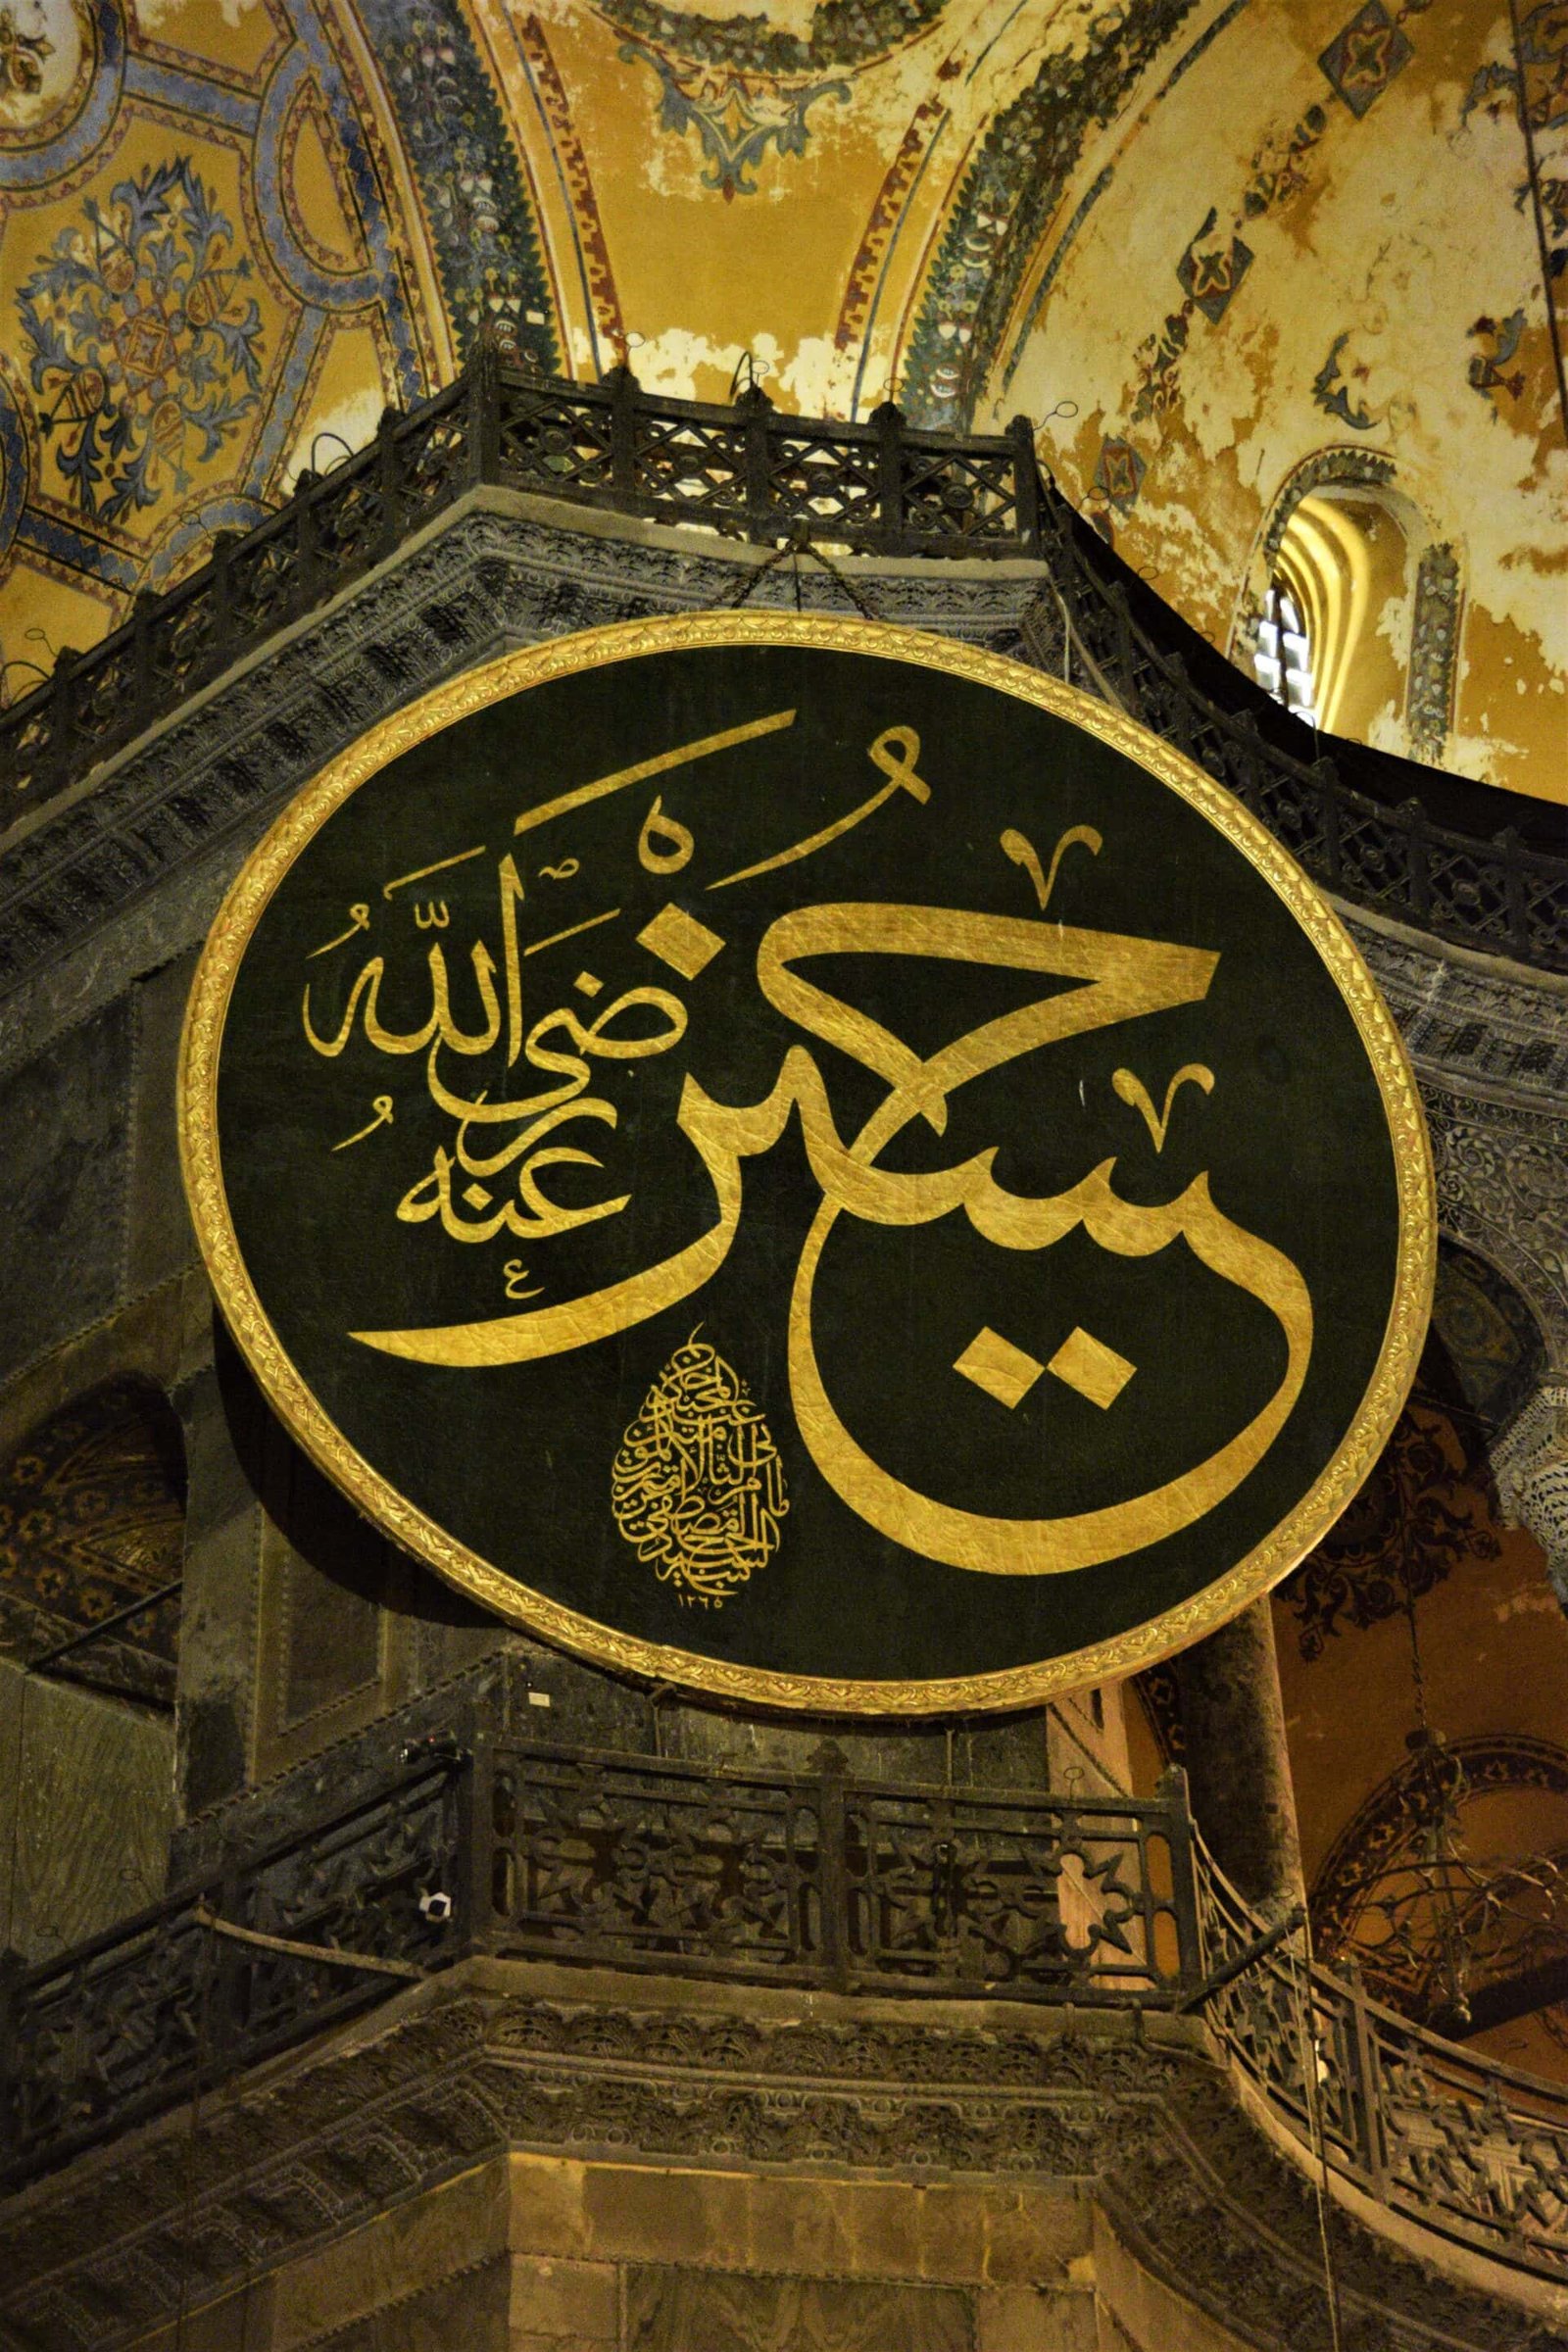 giant, wodden disc depicting the name of Hussain in golden calligraphy